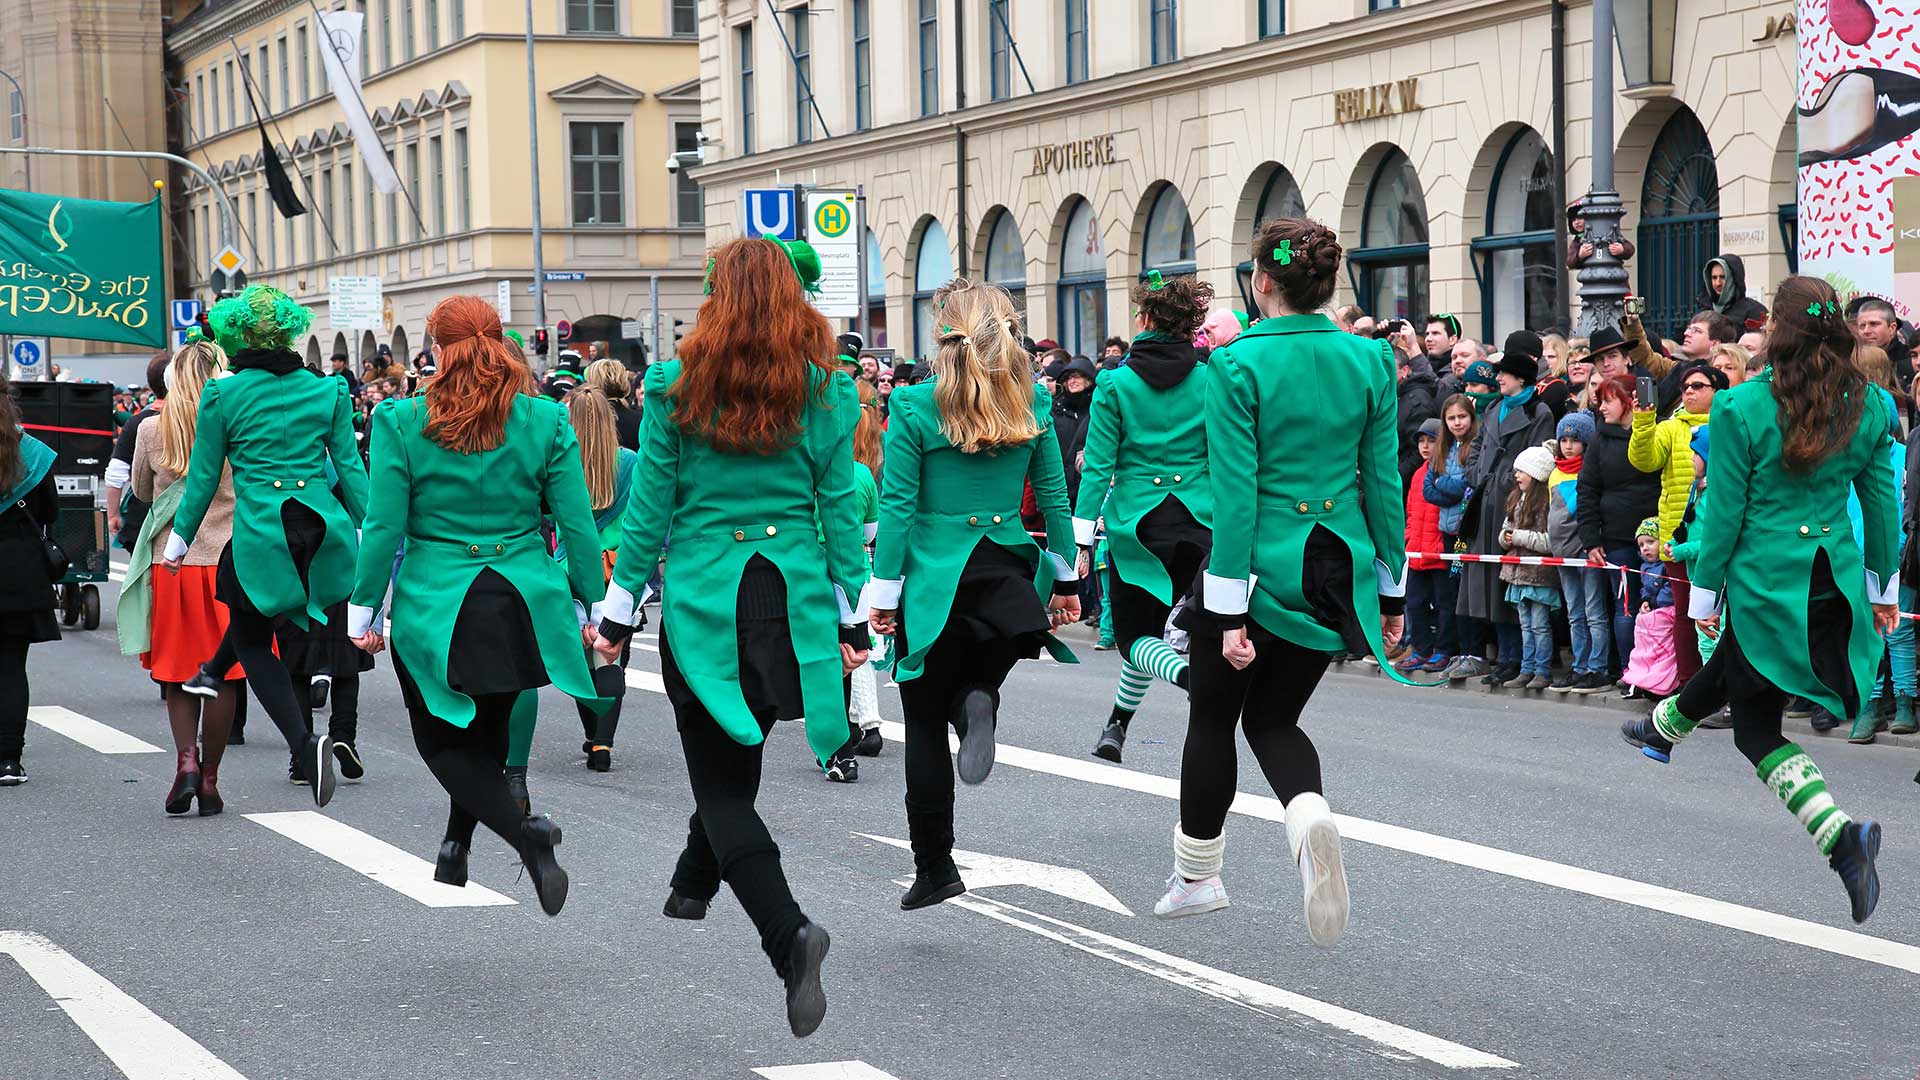 Dancers dressed in green performing in a St. Patrick's Day parade in Munich.